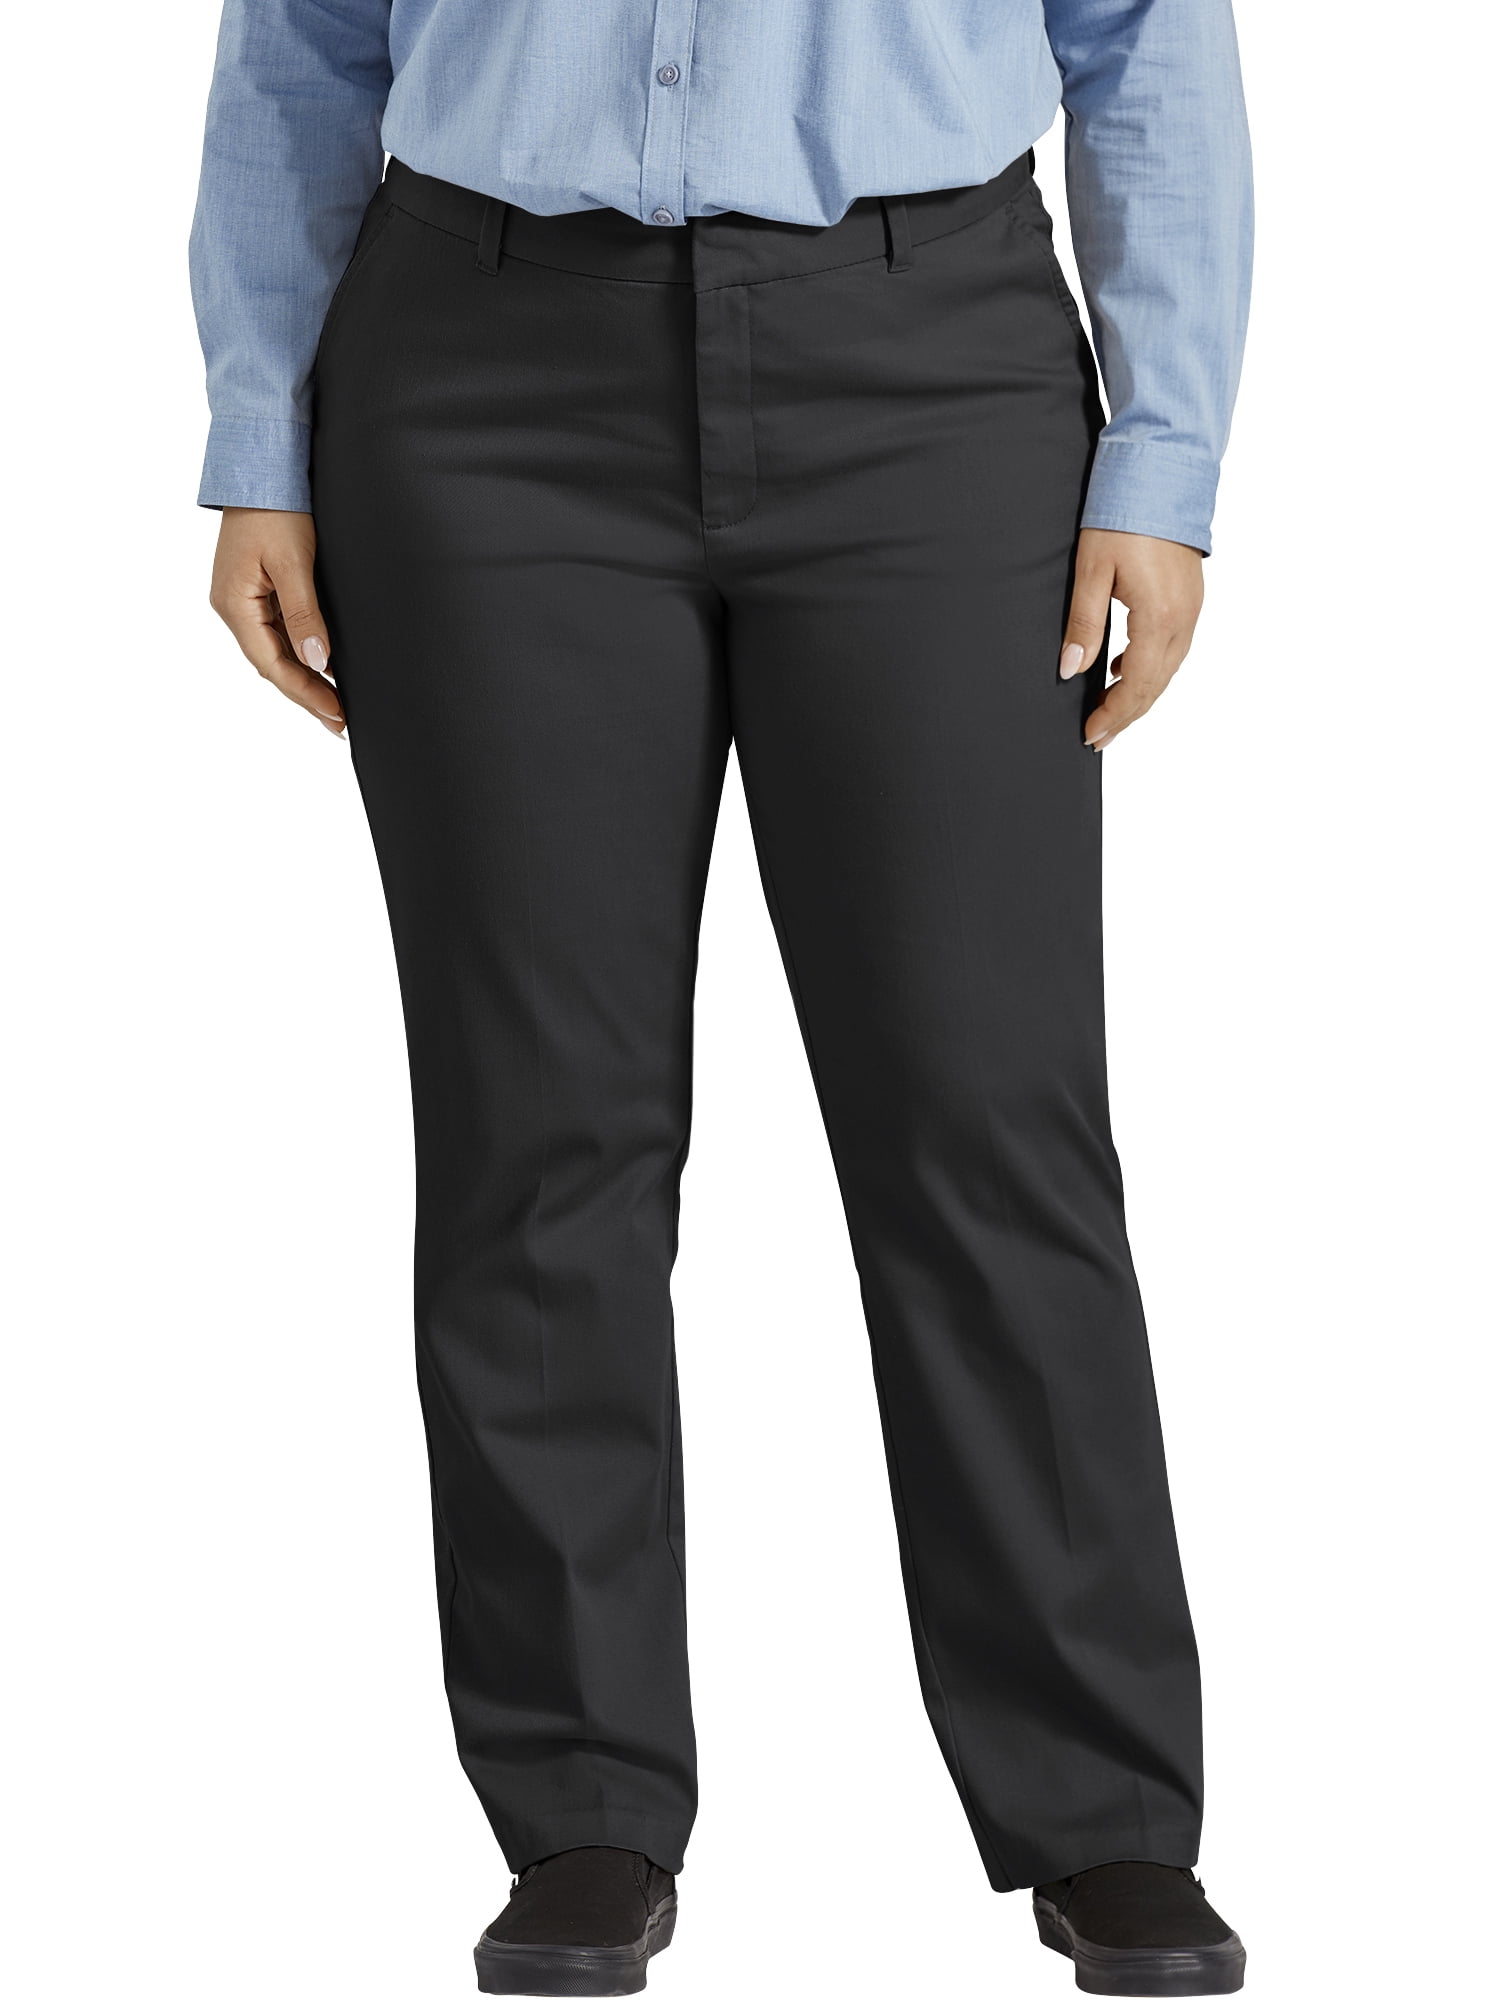 Dickies Women's Plus Size Perfectly Slimming Straight Pant - Walmart.com